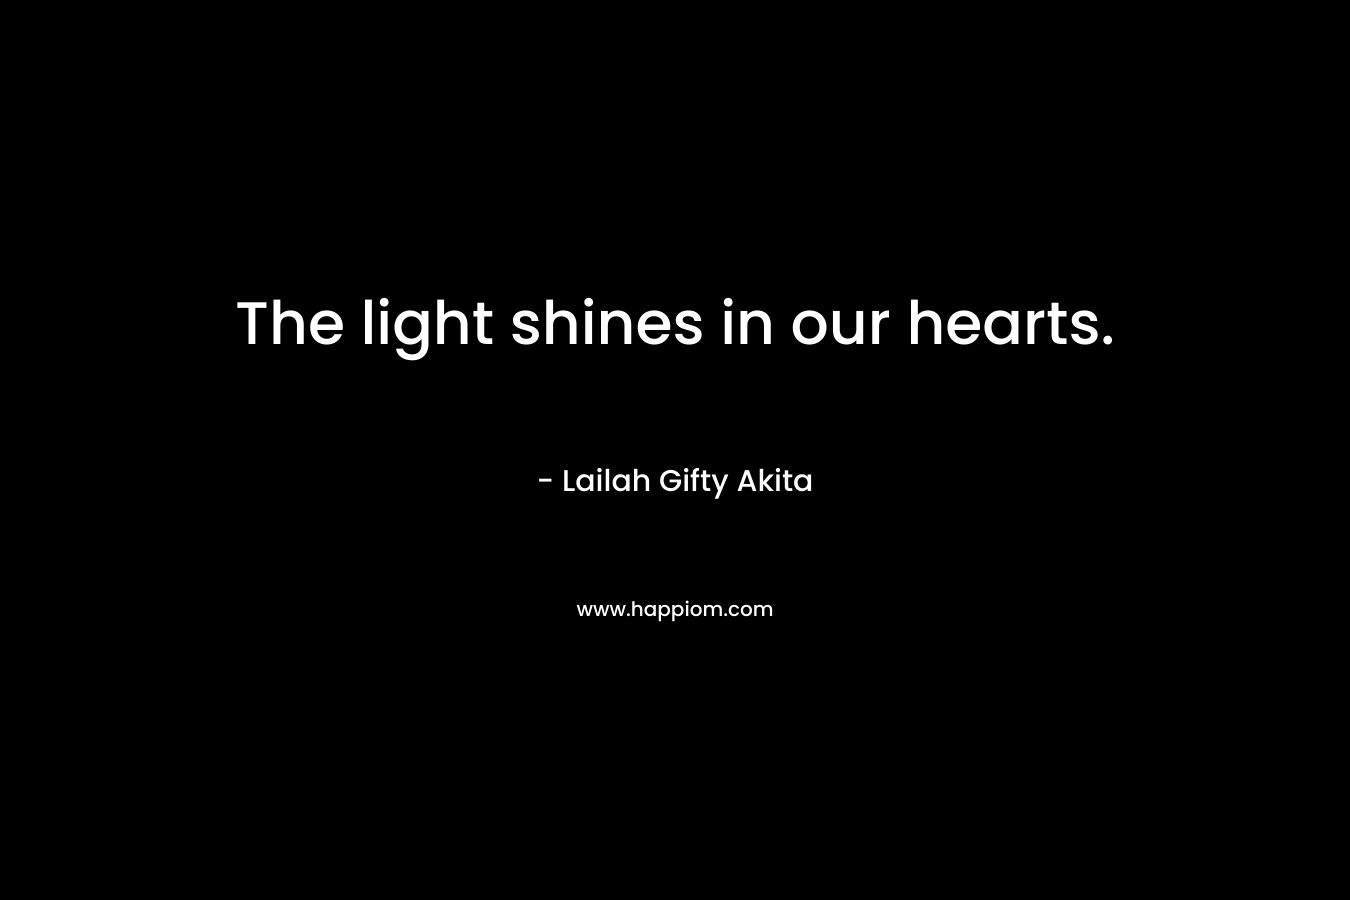 The light shines in our hearts.